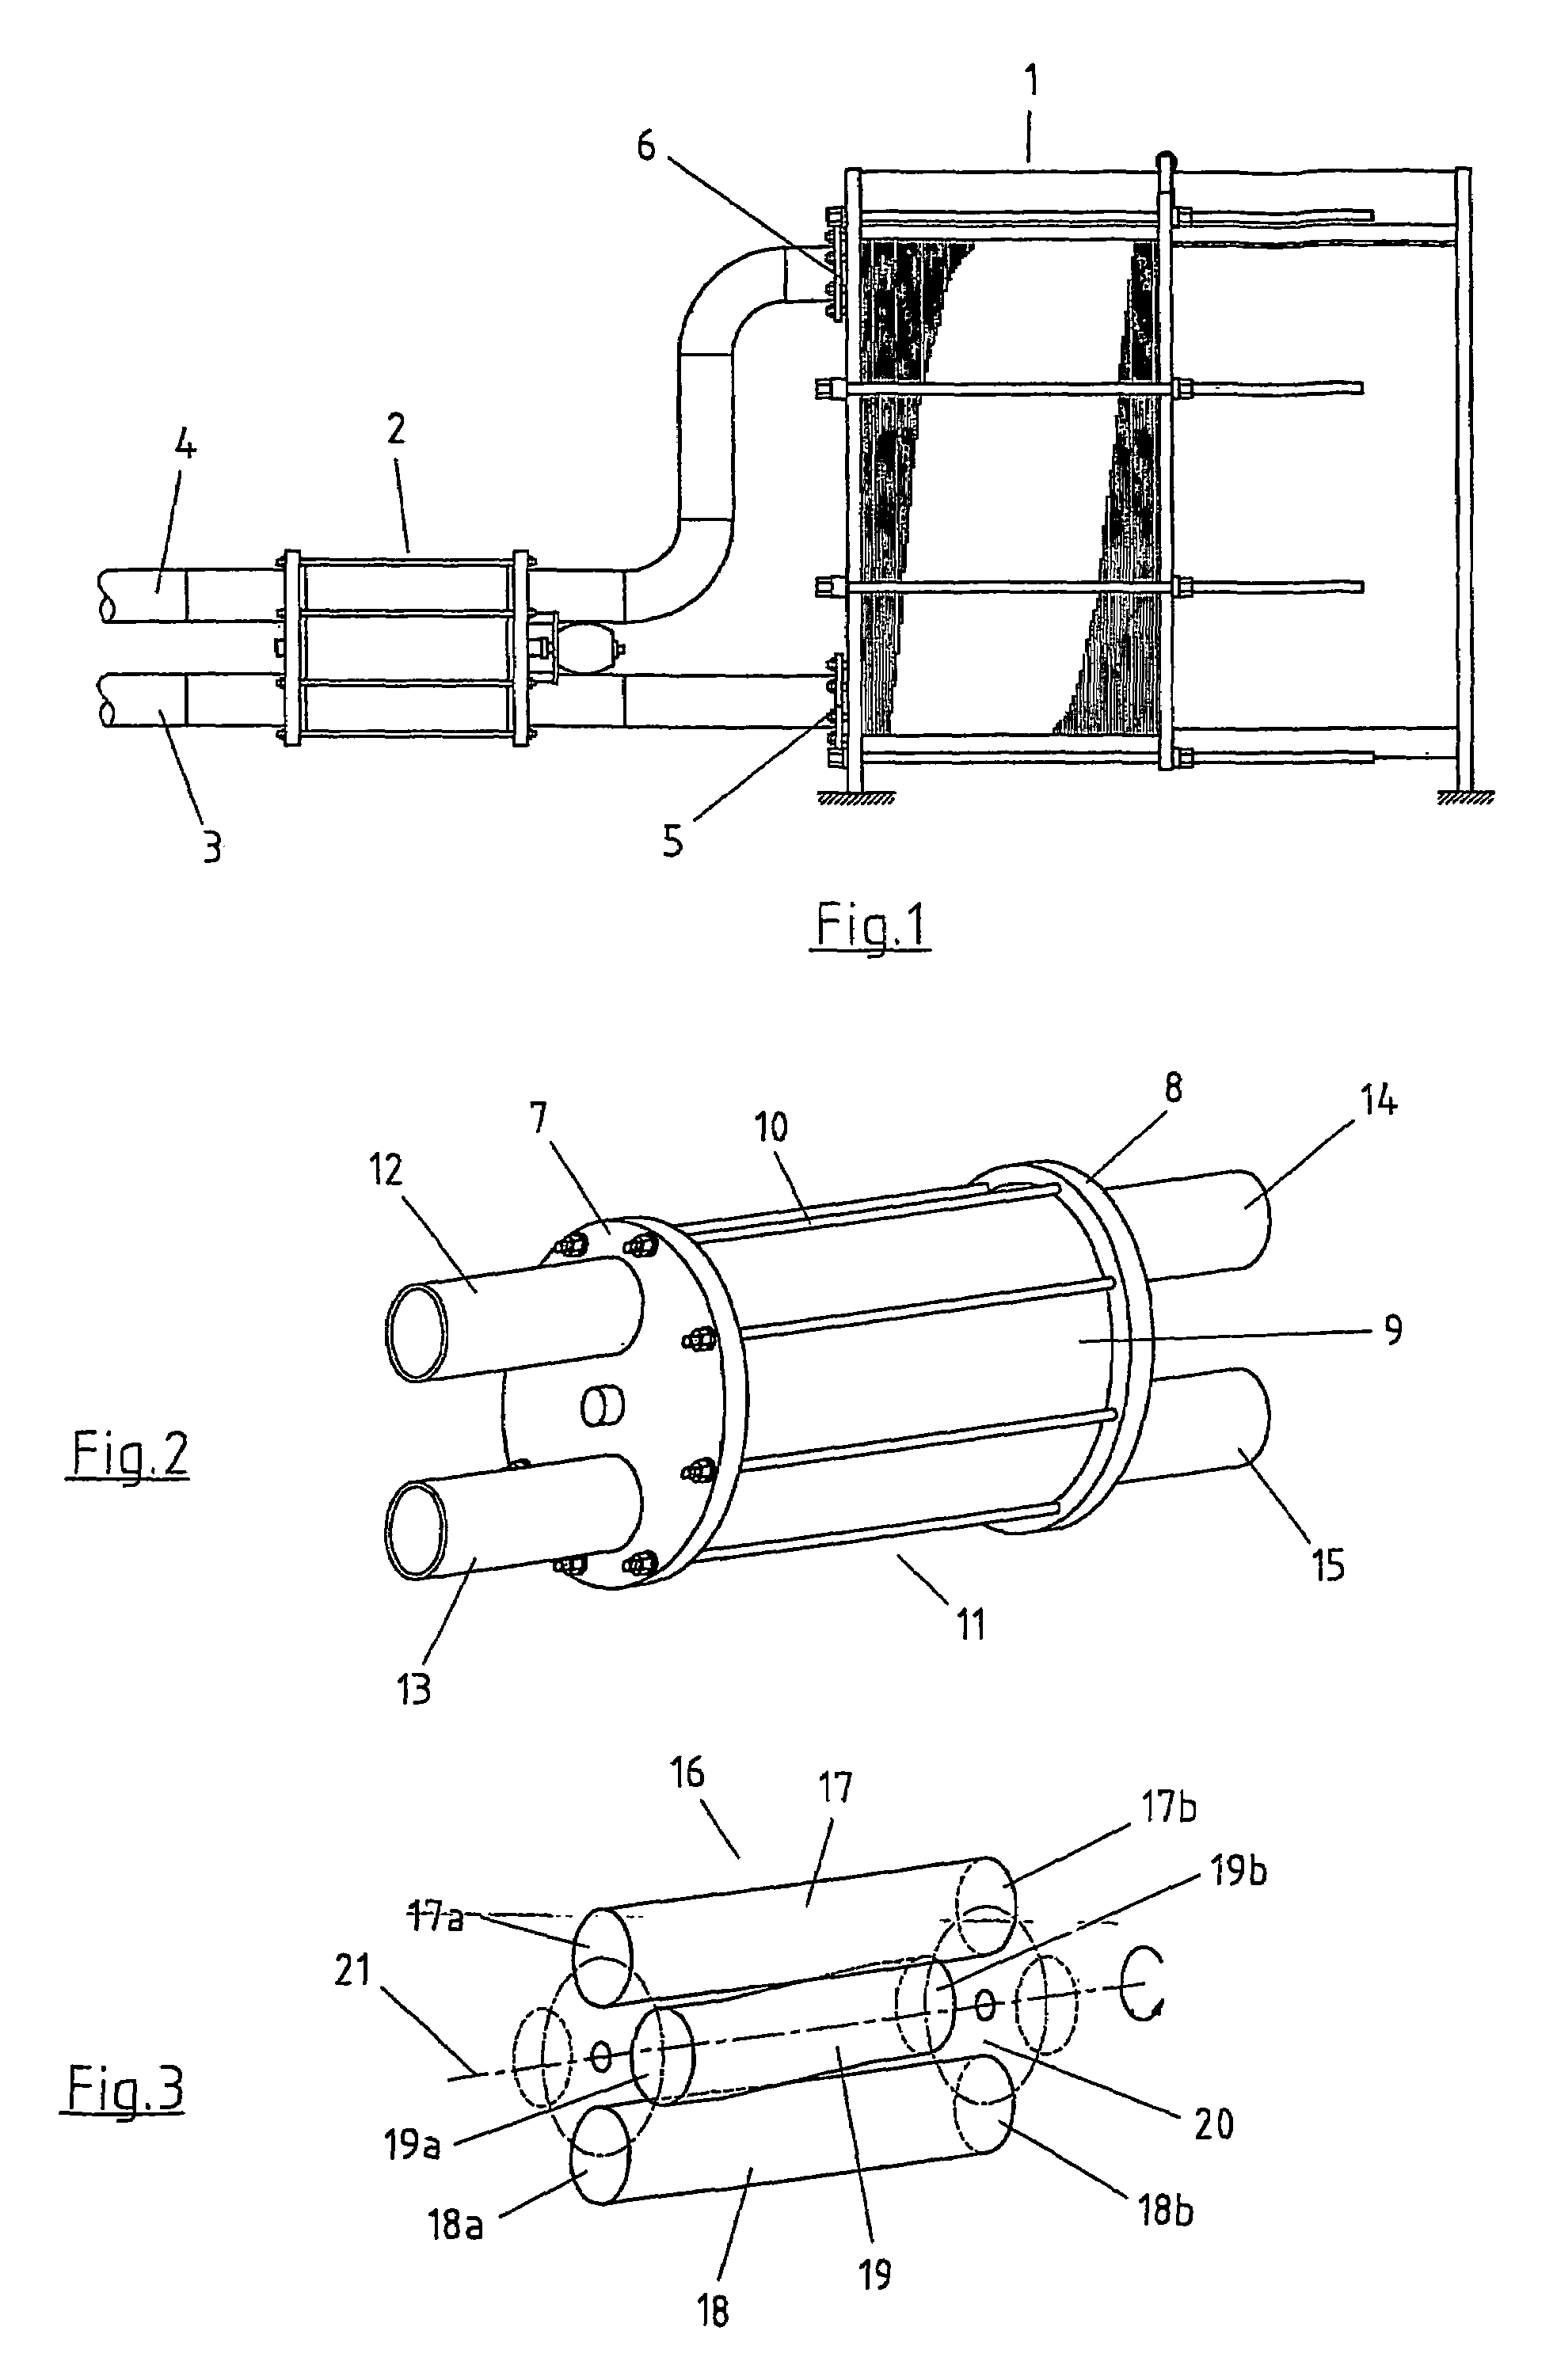 Valve for changing the direction of flow of a fluid in pipe conduits